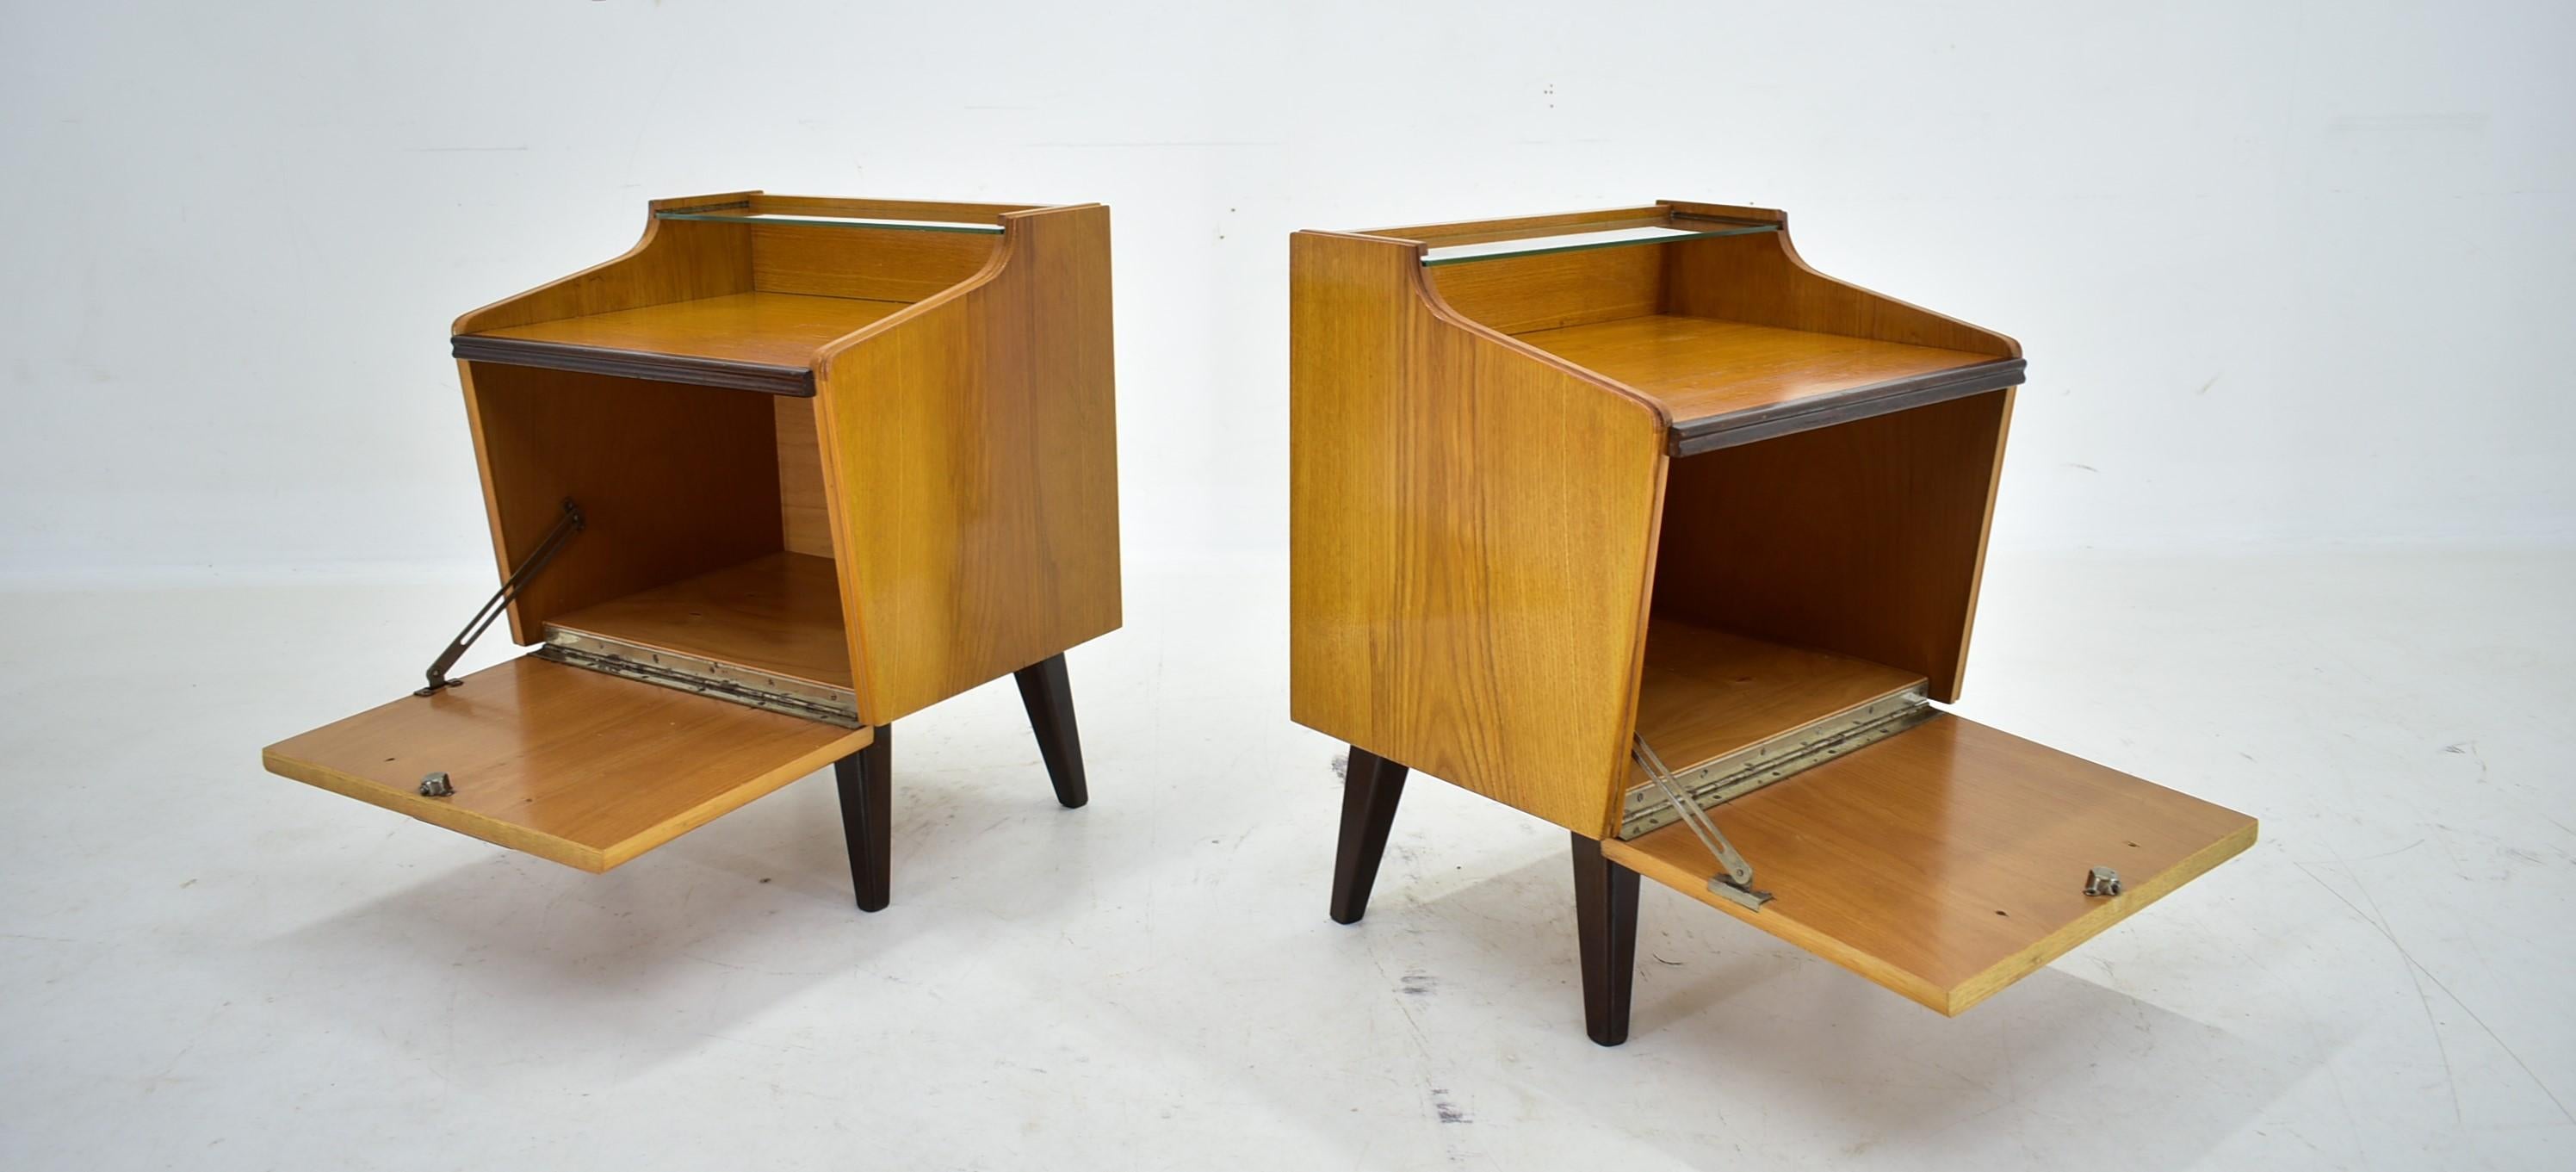 1960s Pair of Midcentury Bedside Tables by Mojmir Požár, Czechoslovakia For Sale 2